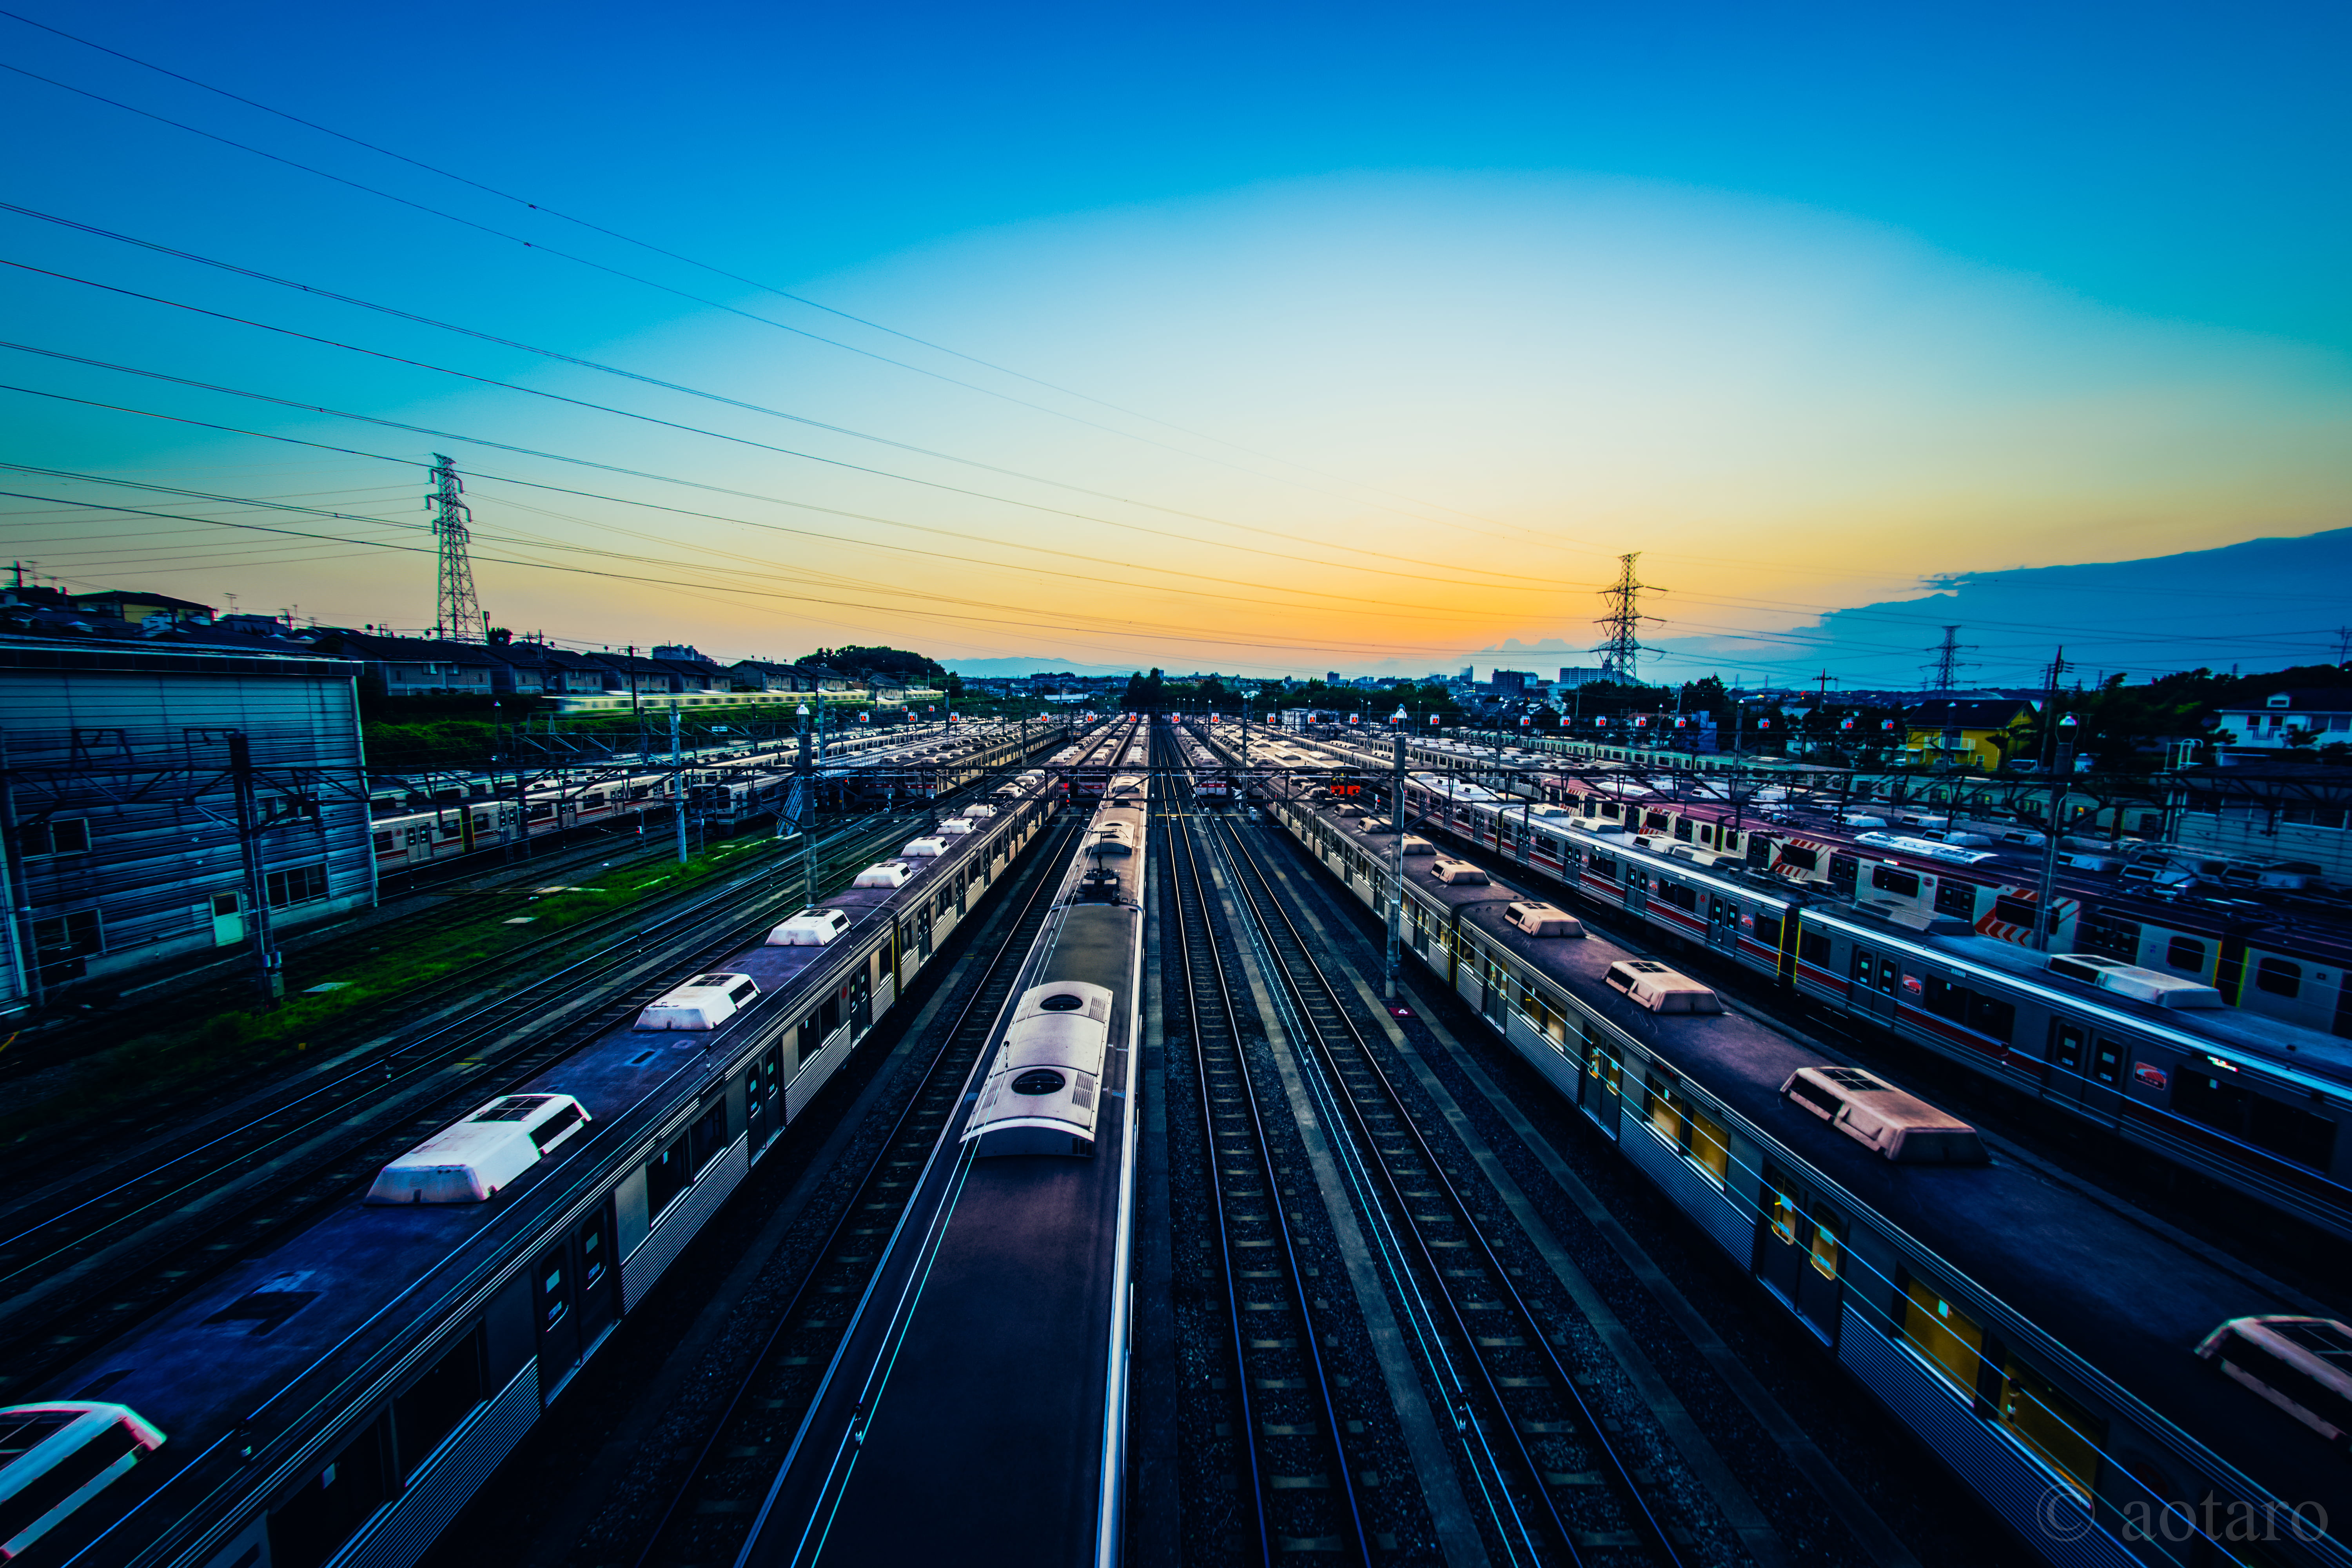 timelapse photography of trains, Sunset, blue hour, Classification Yard